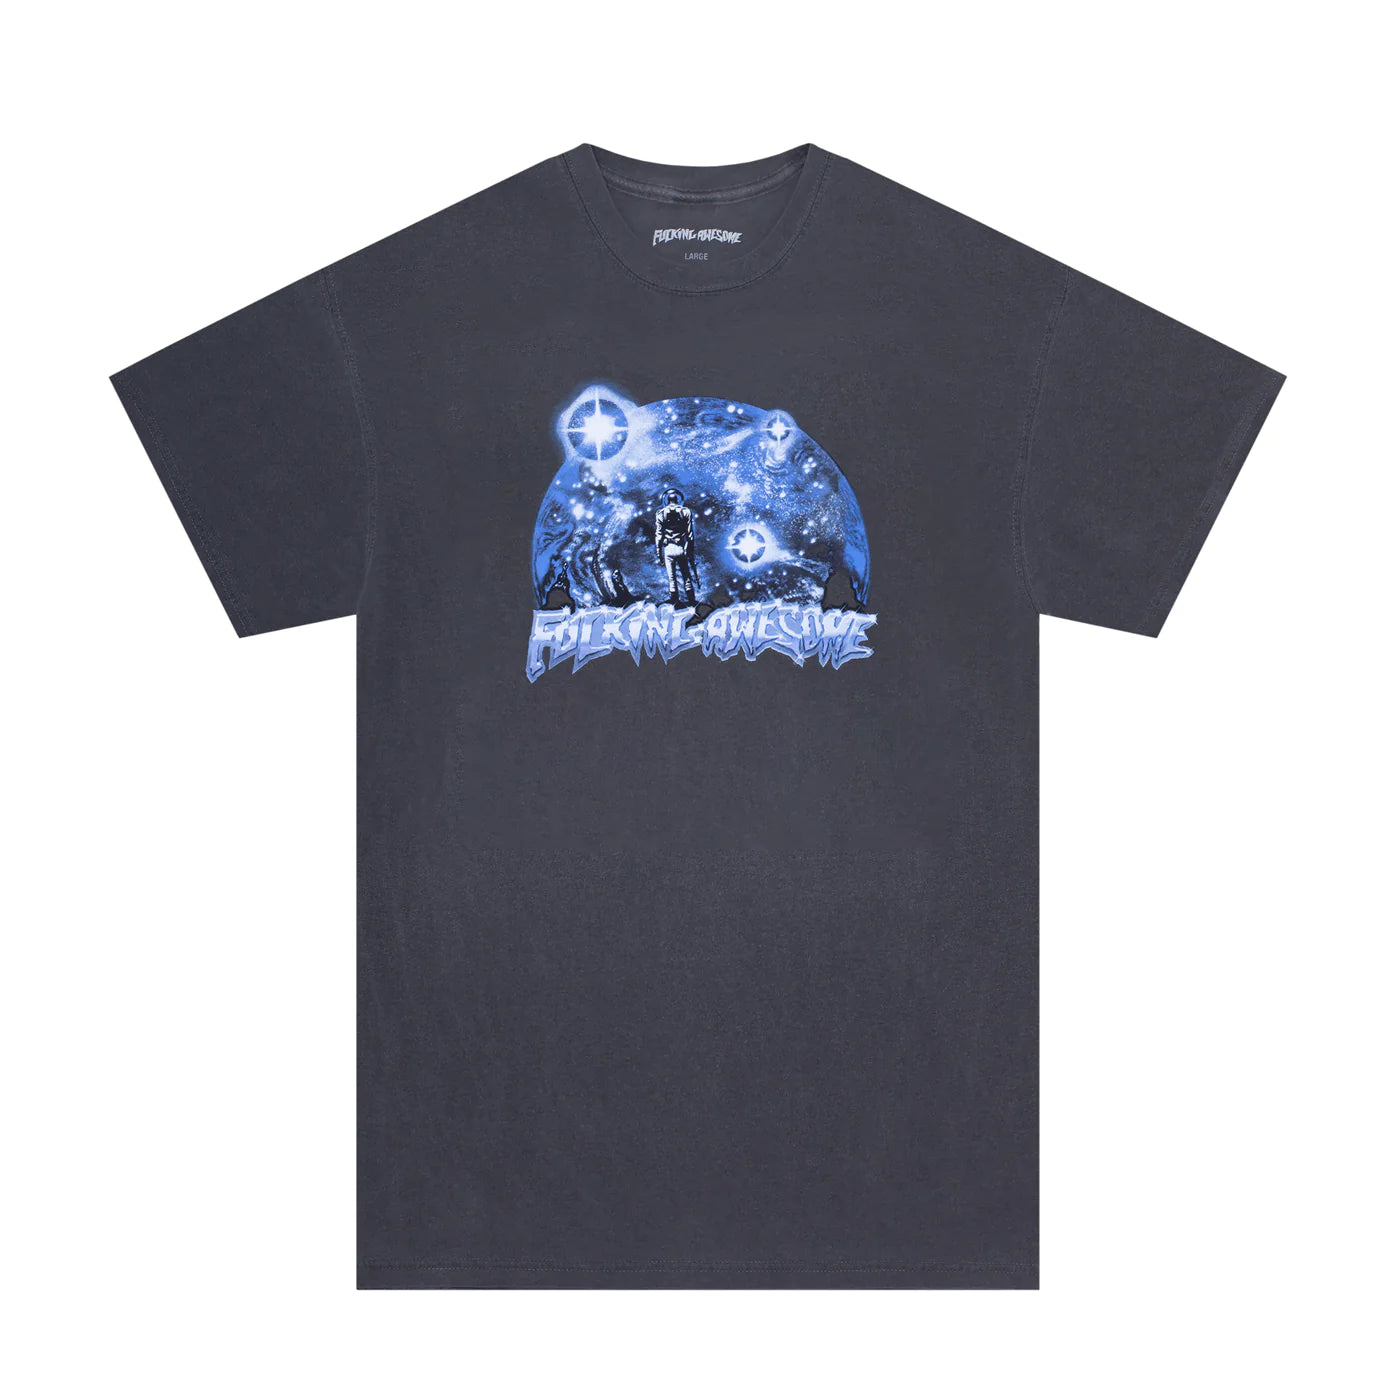 Spaceman s/s Tee Shirt Pepper(size options listed)